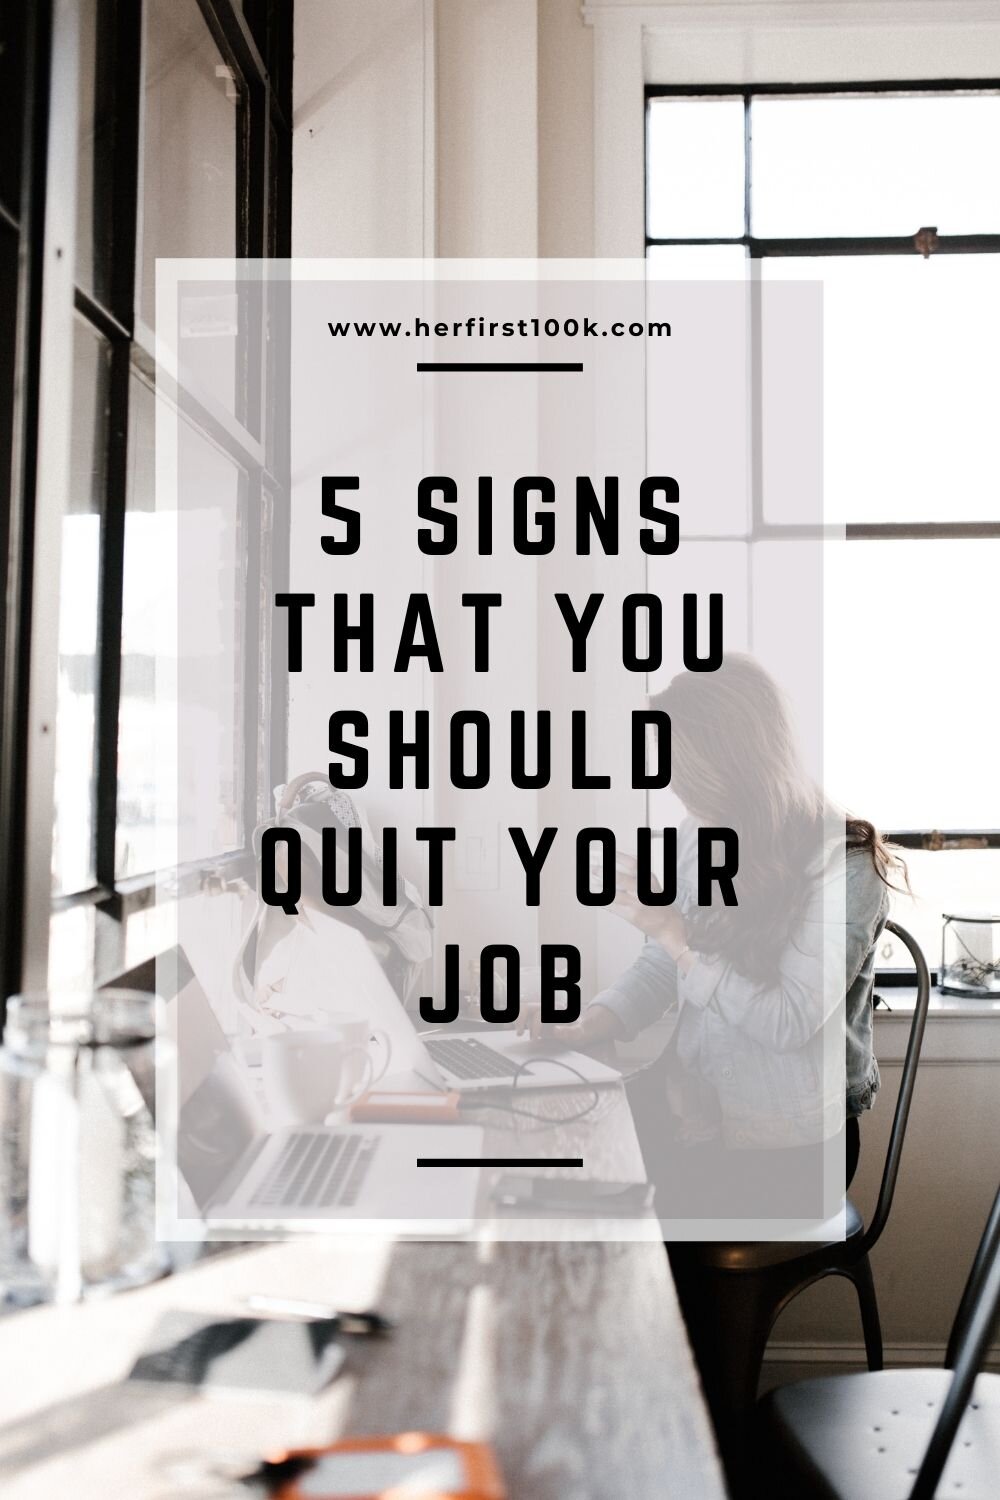 Signs-You-Should-Quit-Your-Job.jpg